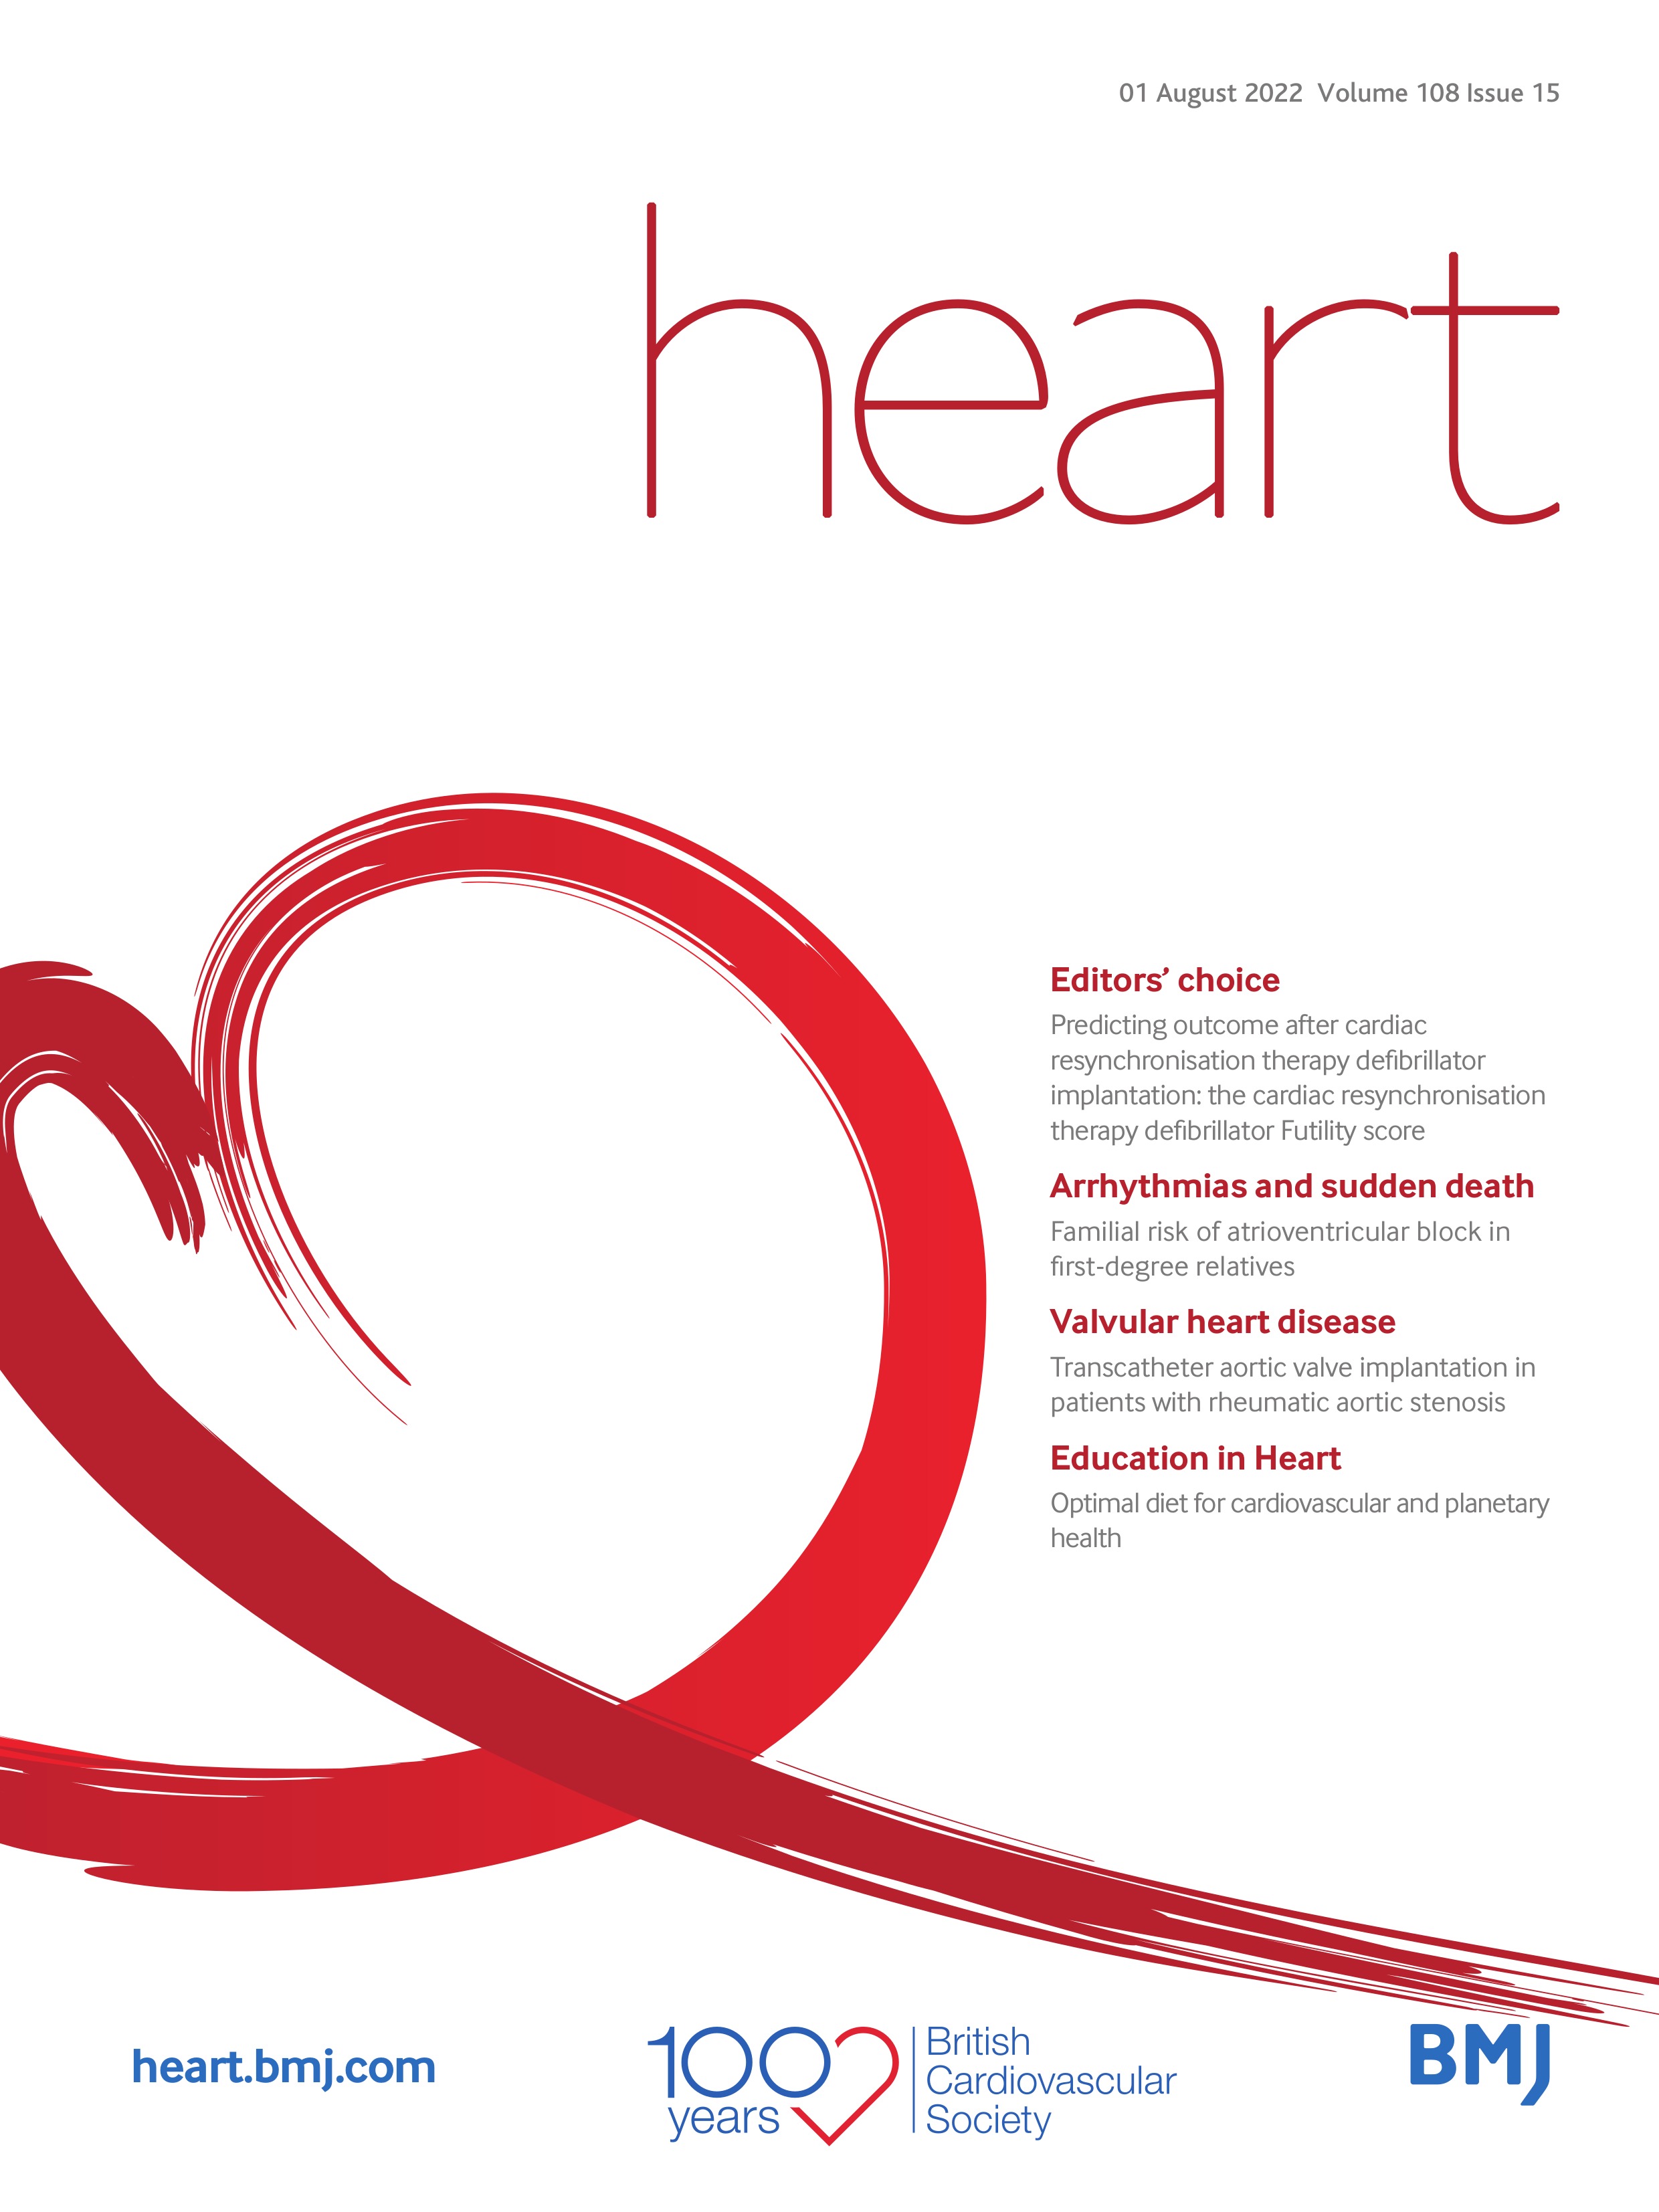 Hyponatraemia in heart failure: time for new solutions?